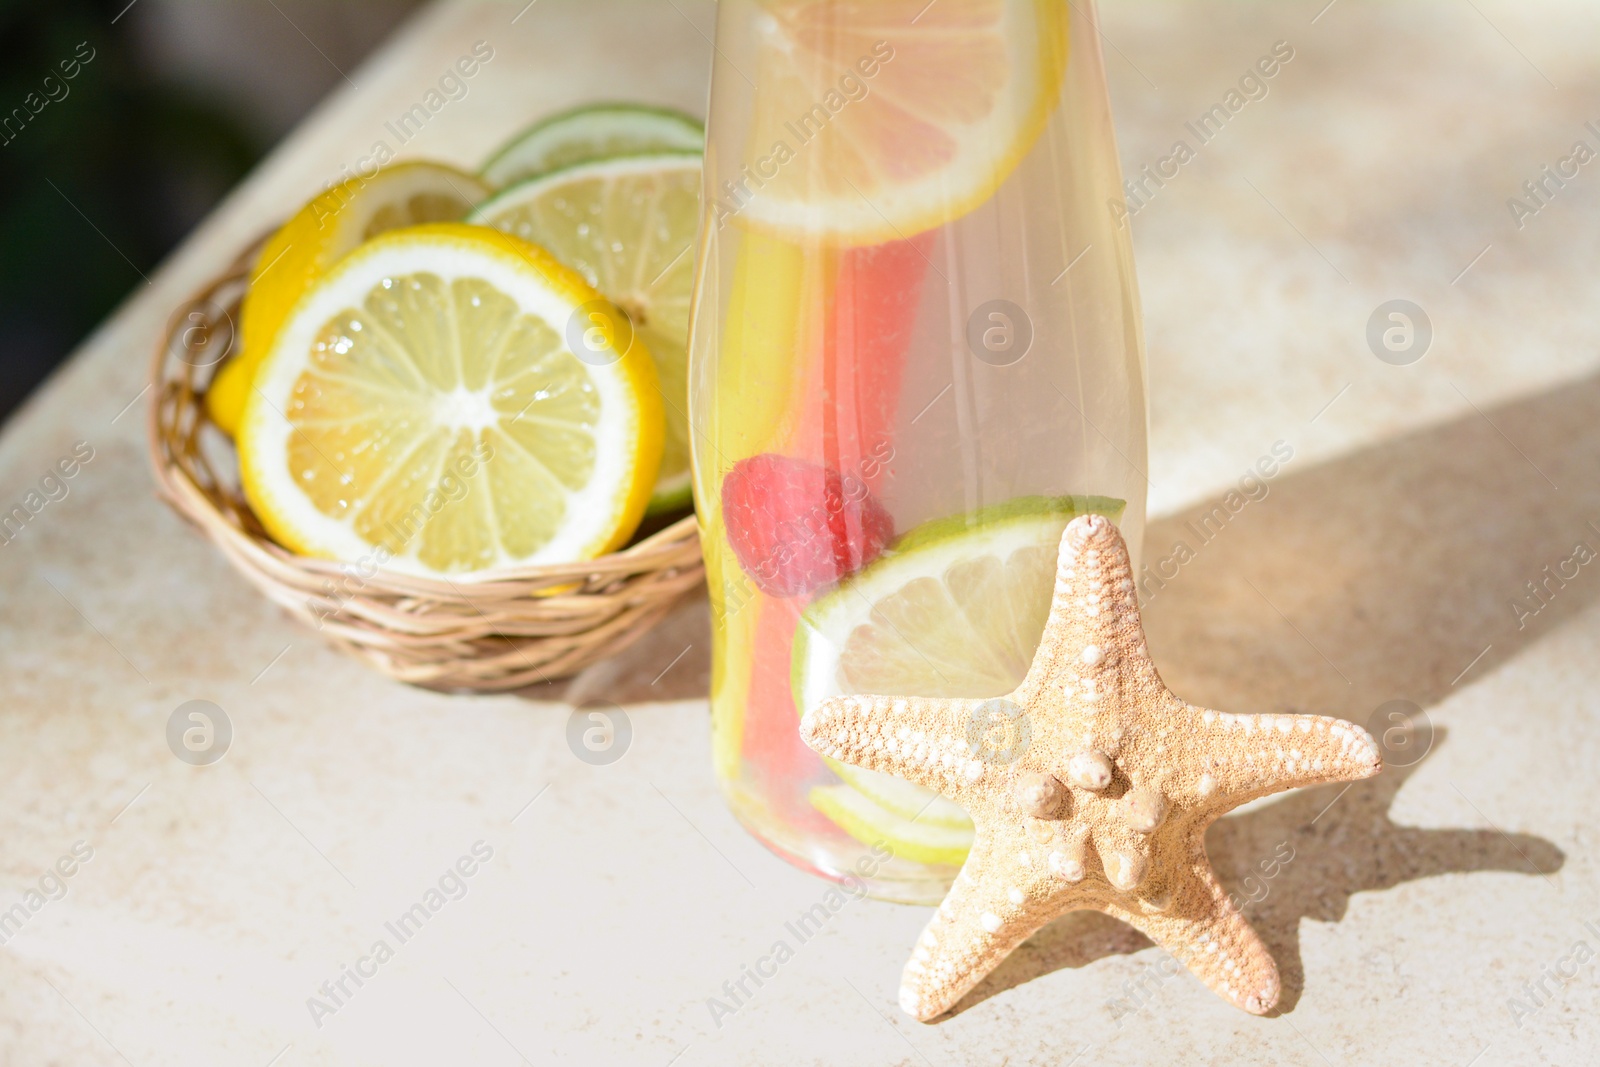 Photo of Citrus fruits and refreshing tasty lemonade served in glass bottle on beige table